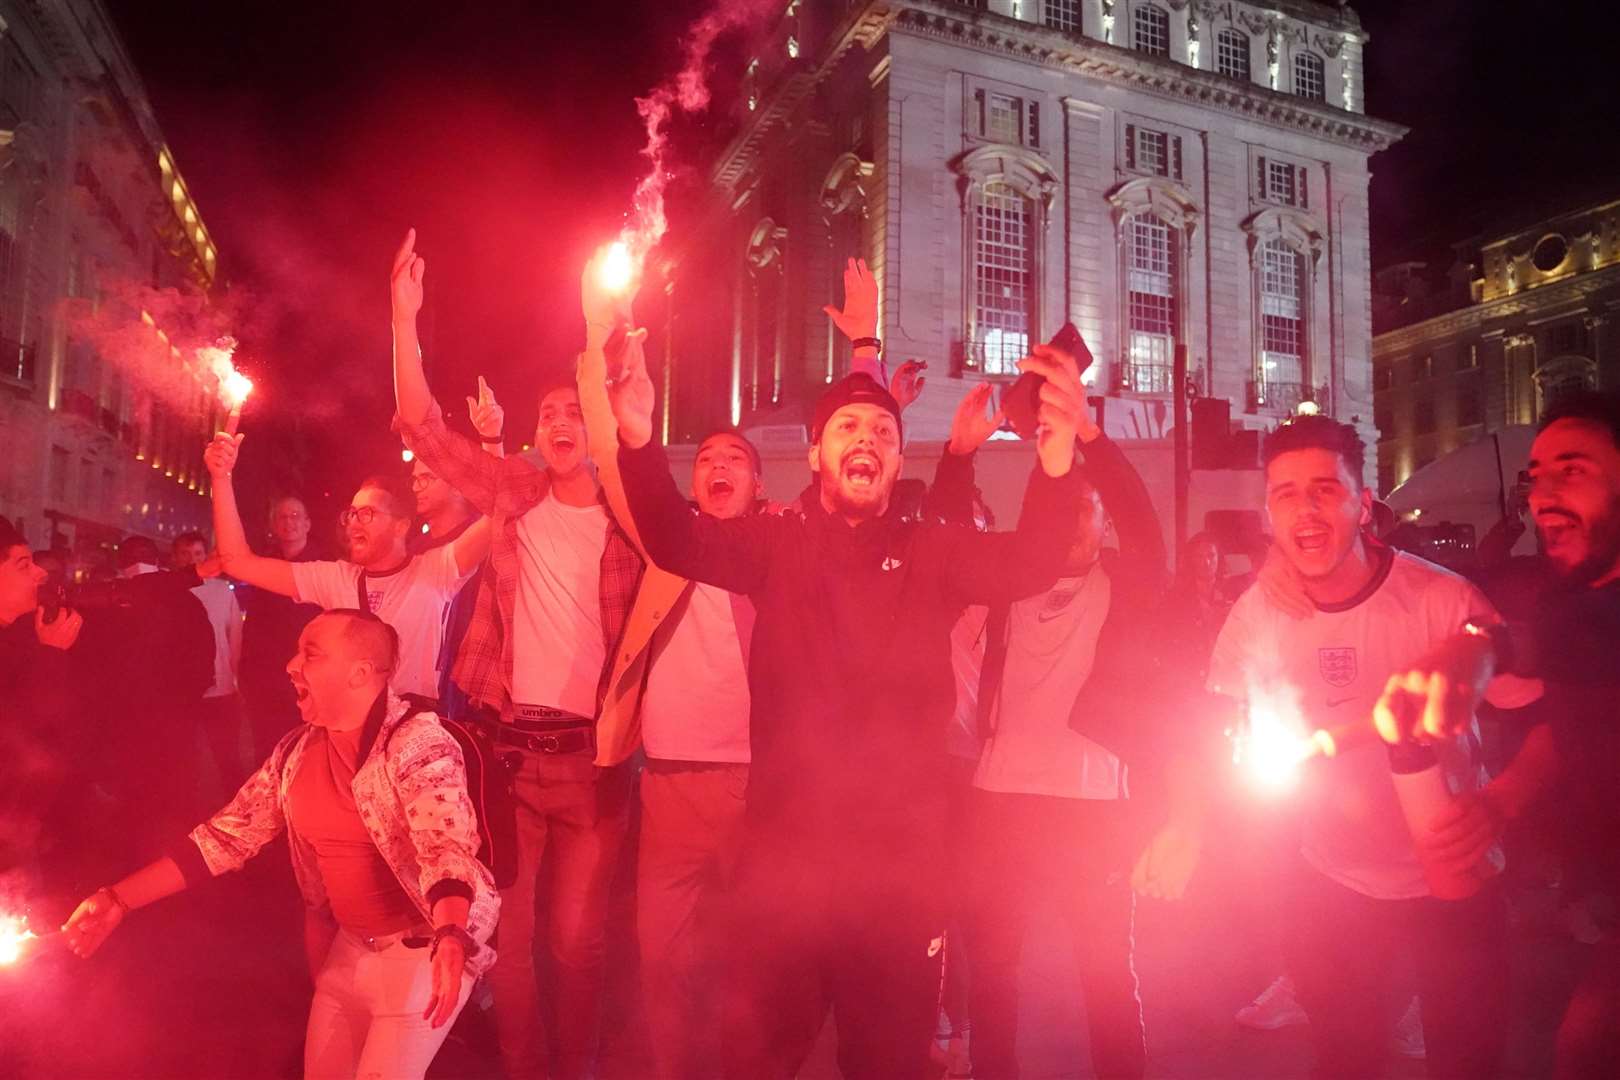 Fans let off flares as they celebrate England’s extra-time win over Denmark in Piccadilly Circus, central London, on Wednesday night (Kirsty O’Connor/PA)